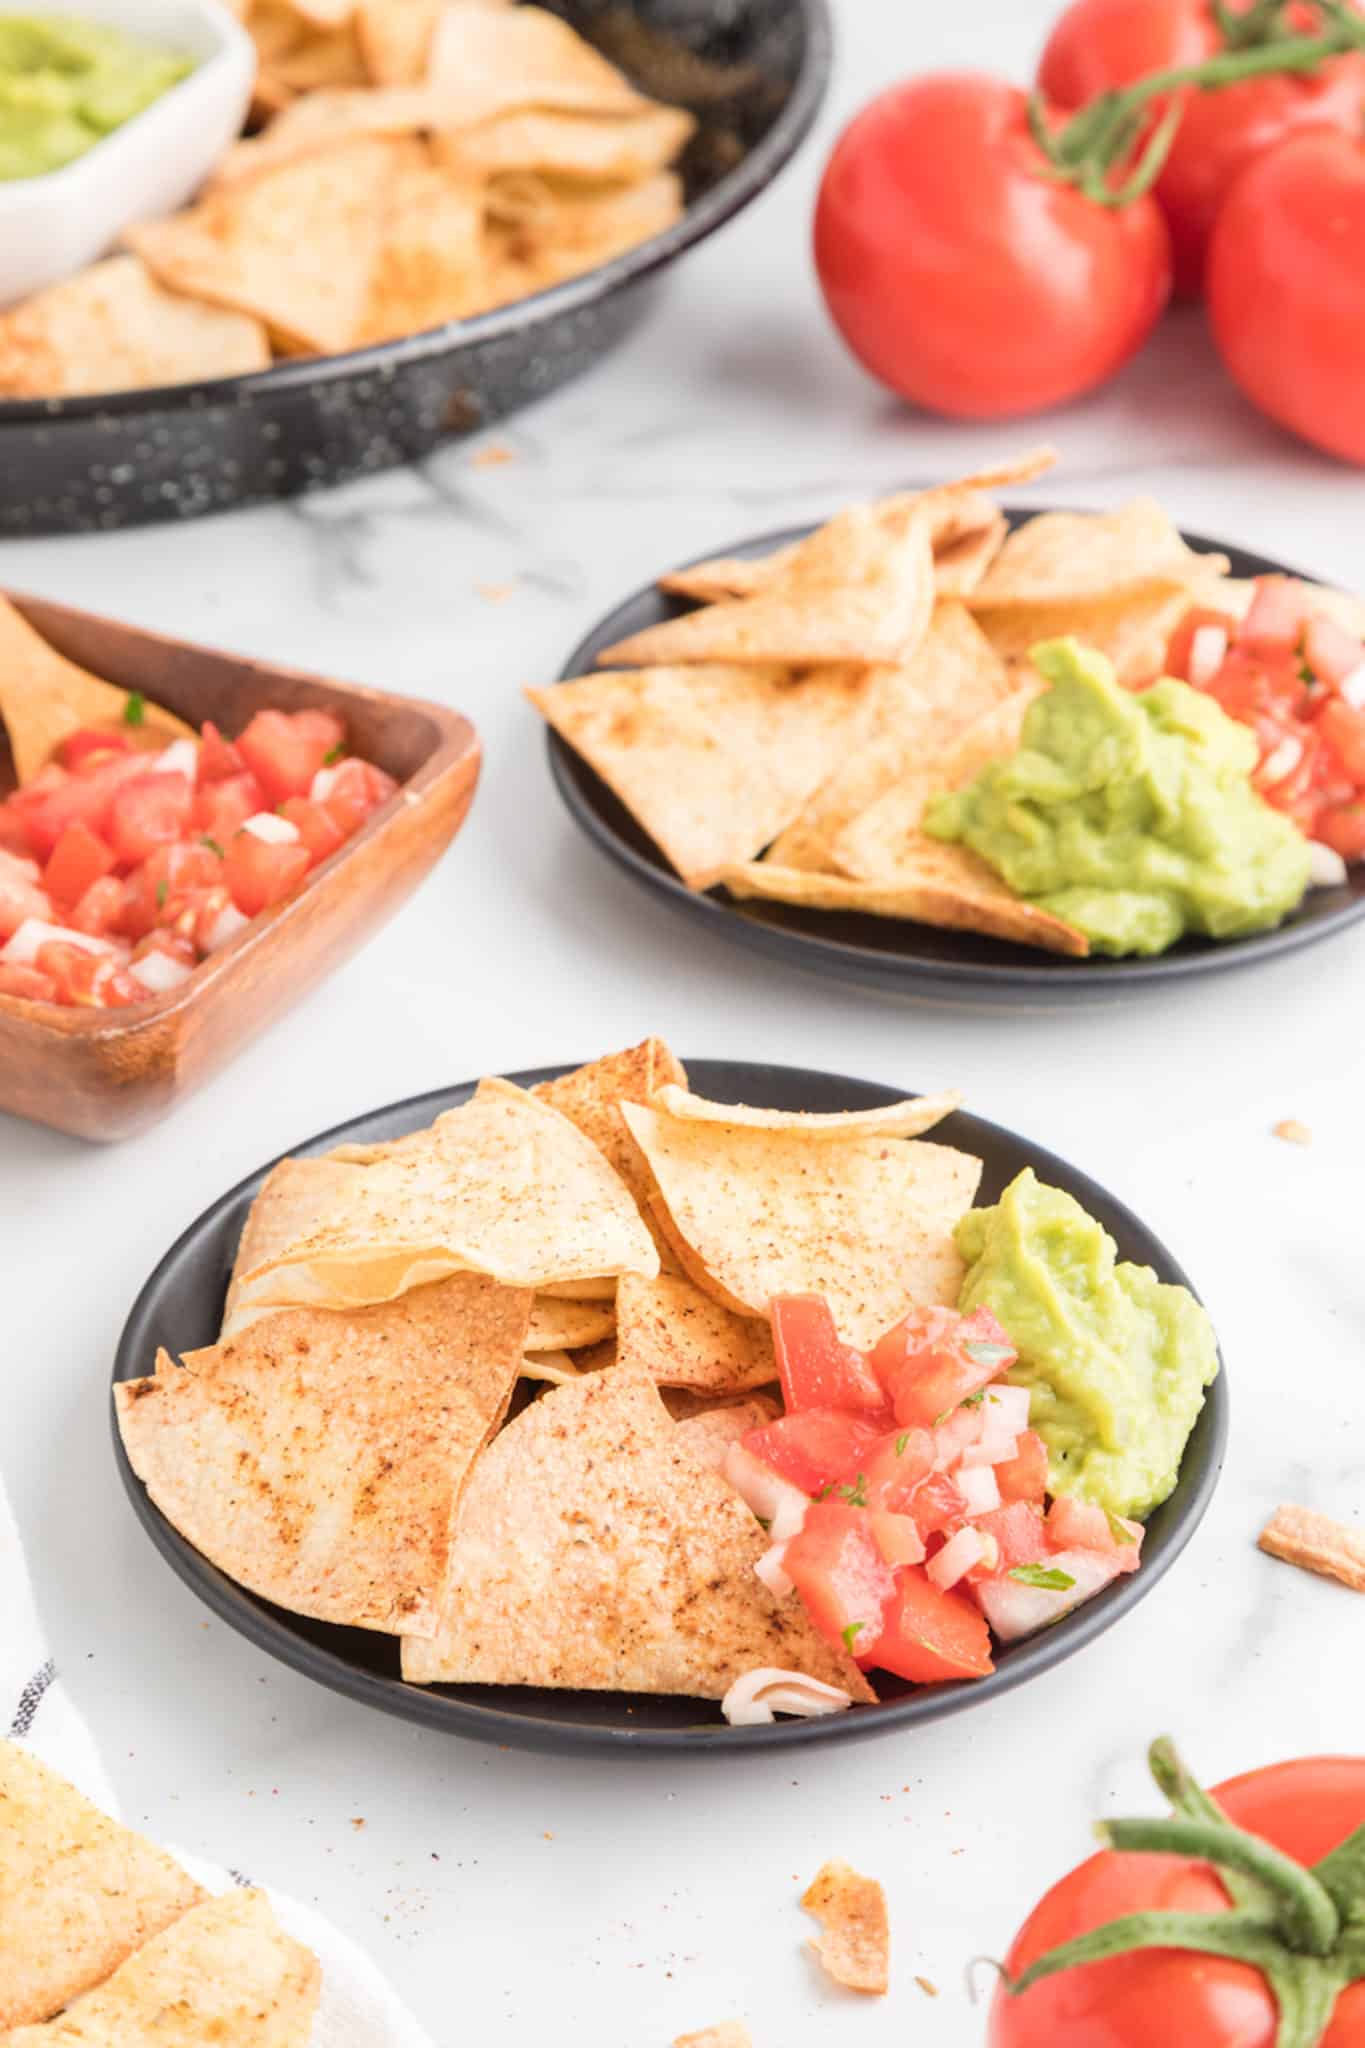 Two small black plates of fresh tortilla chips with salsa and guacamole.